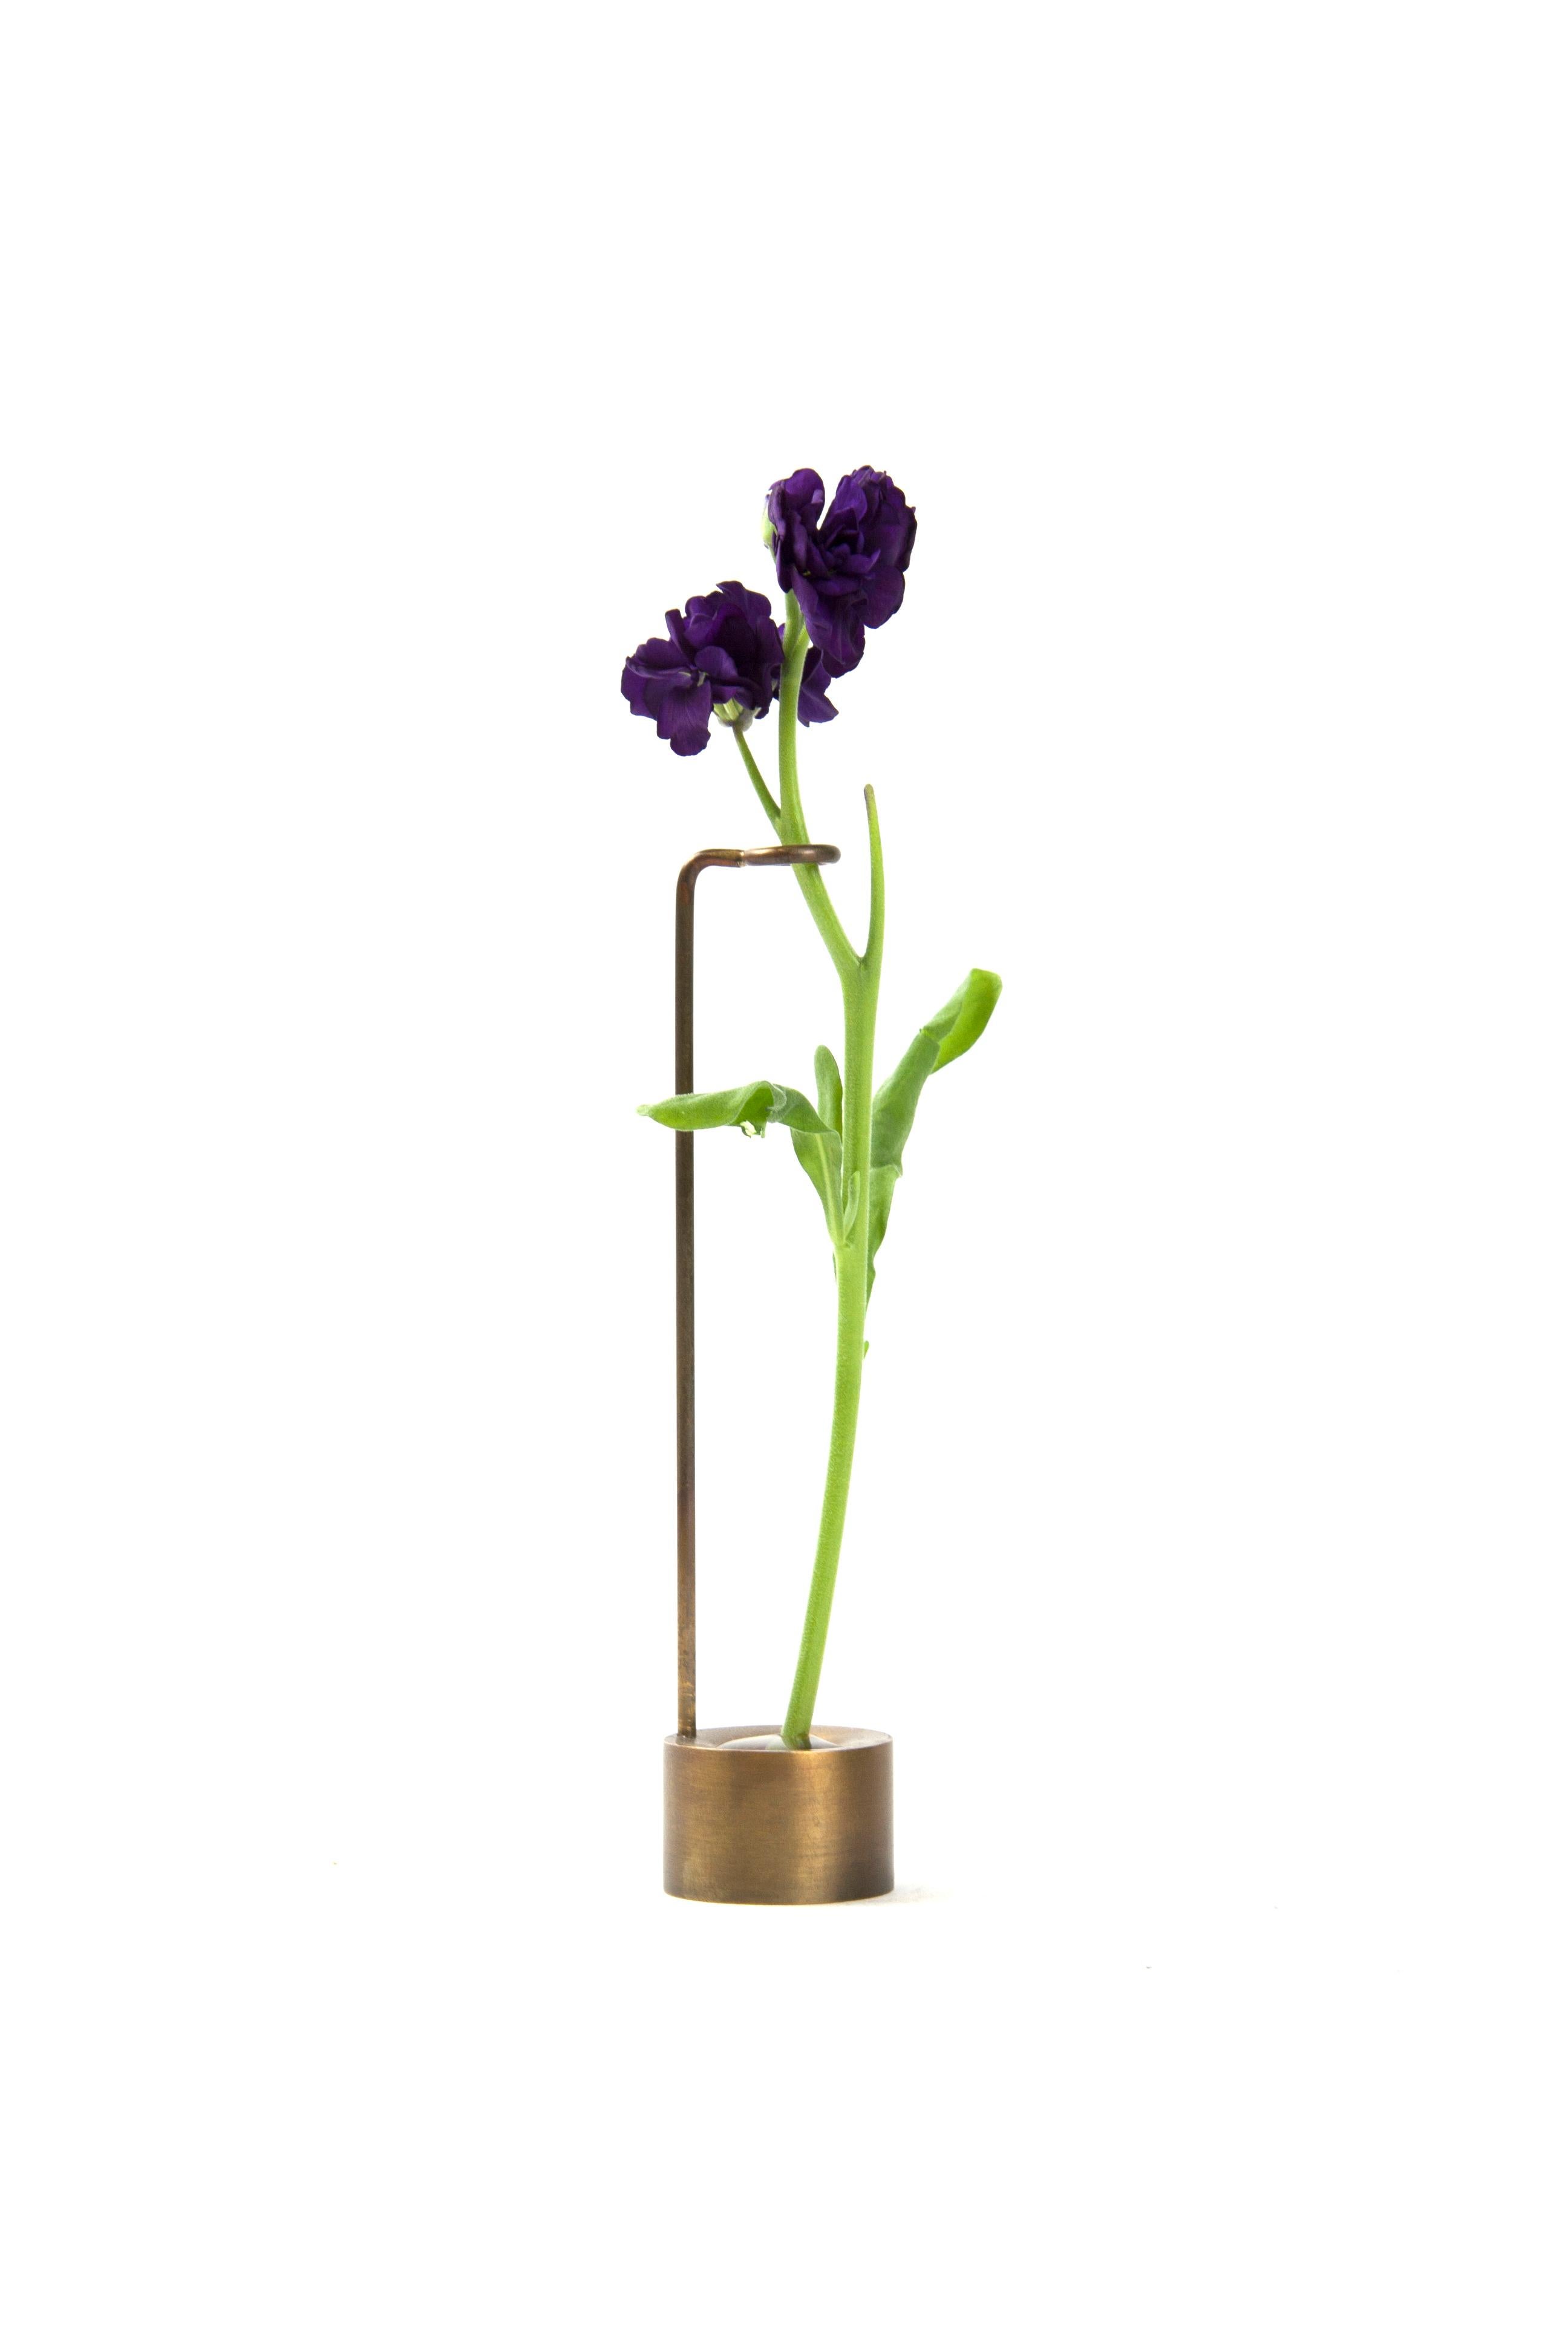 Brass Bud vase II by Gentner Design
Dimensions: D 5 x W 5 x H 15.2 cm
Materials: dull tarnished brass

Each of these delicately, handcrafted Bud Vases is perfect as an individual home accessory or whimsical series. Made of brass and hand